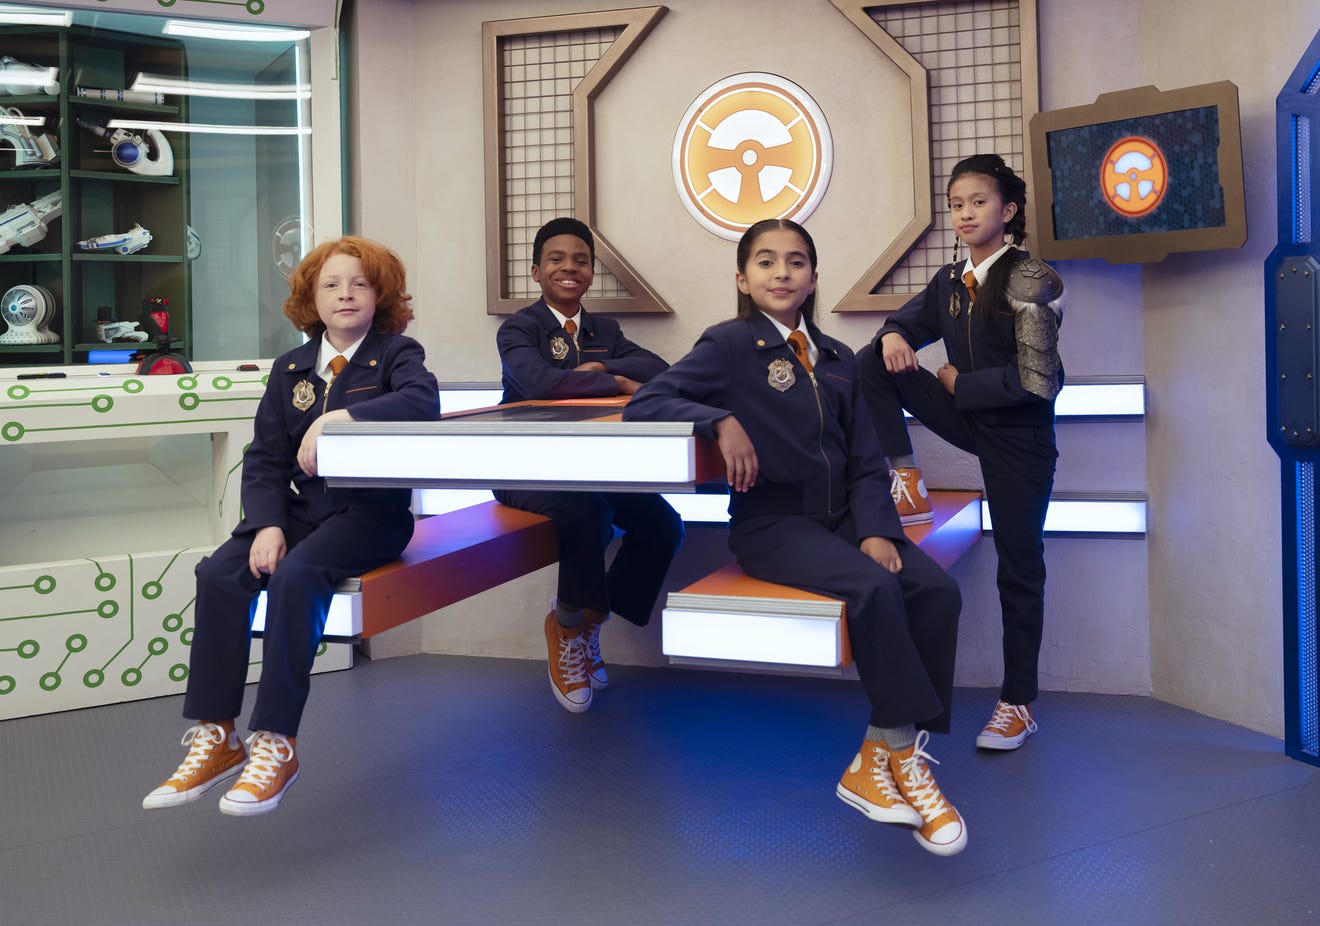 'Odd Squad' cast for new season on PBS Kids revealed! Meet the agents